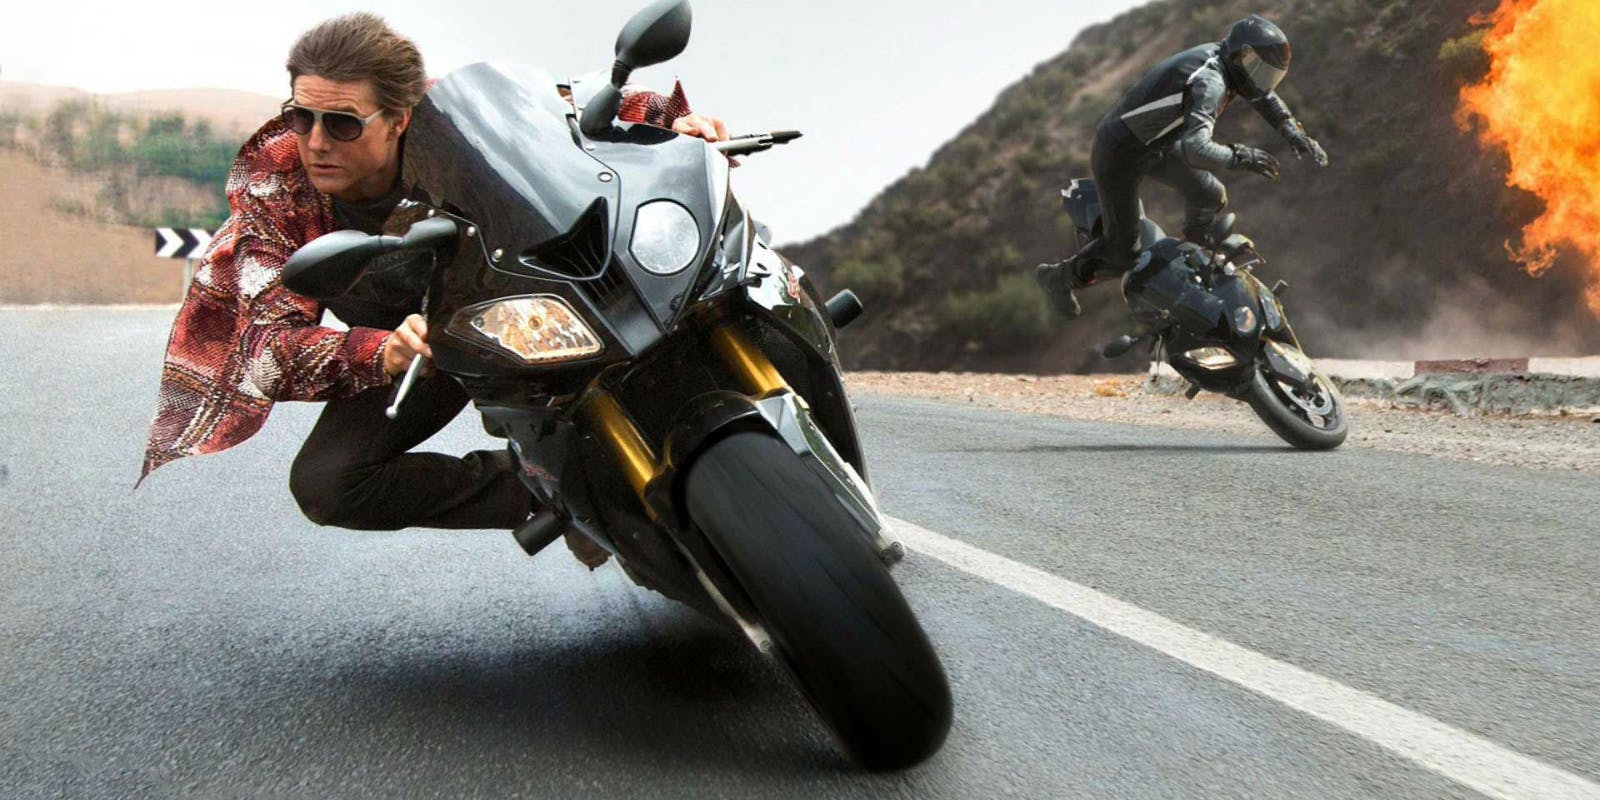 Tom Cruise Resumes Practice on a Motocross Bike for Mission Impossible 7 Movie | DriveMag Riders